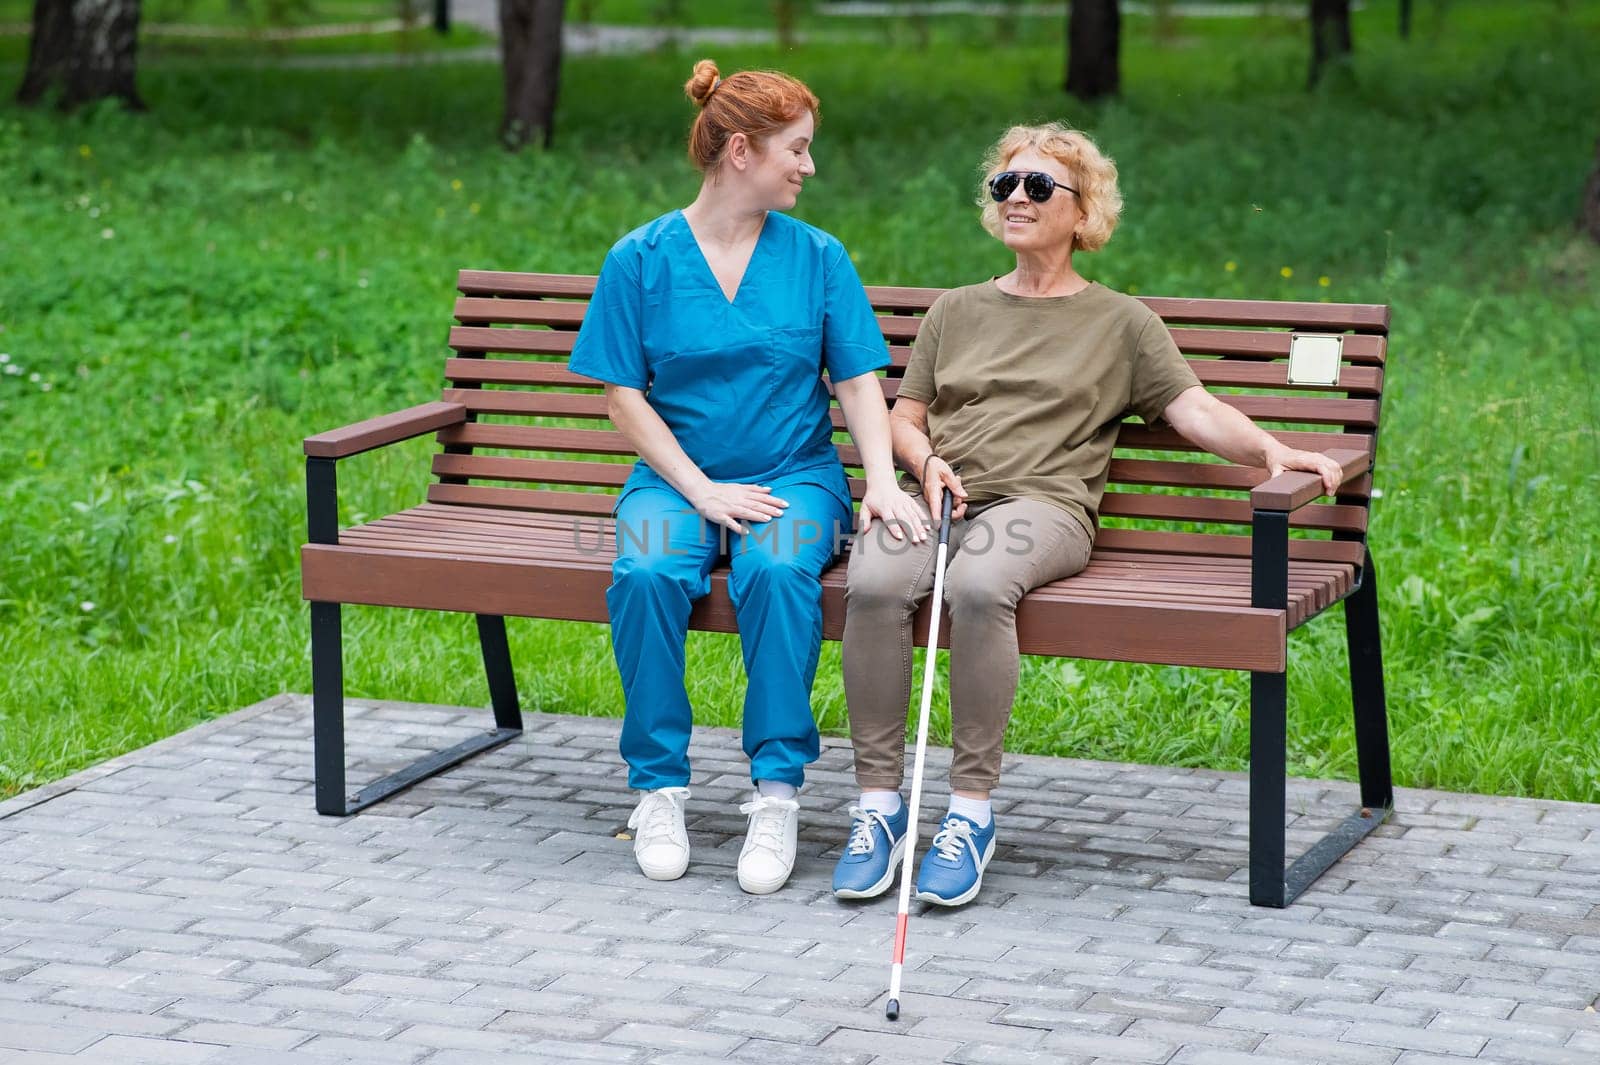 A nurse and an elderly blind woman are sitting on a bench in the park. by mrwed54